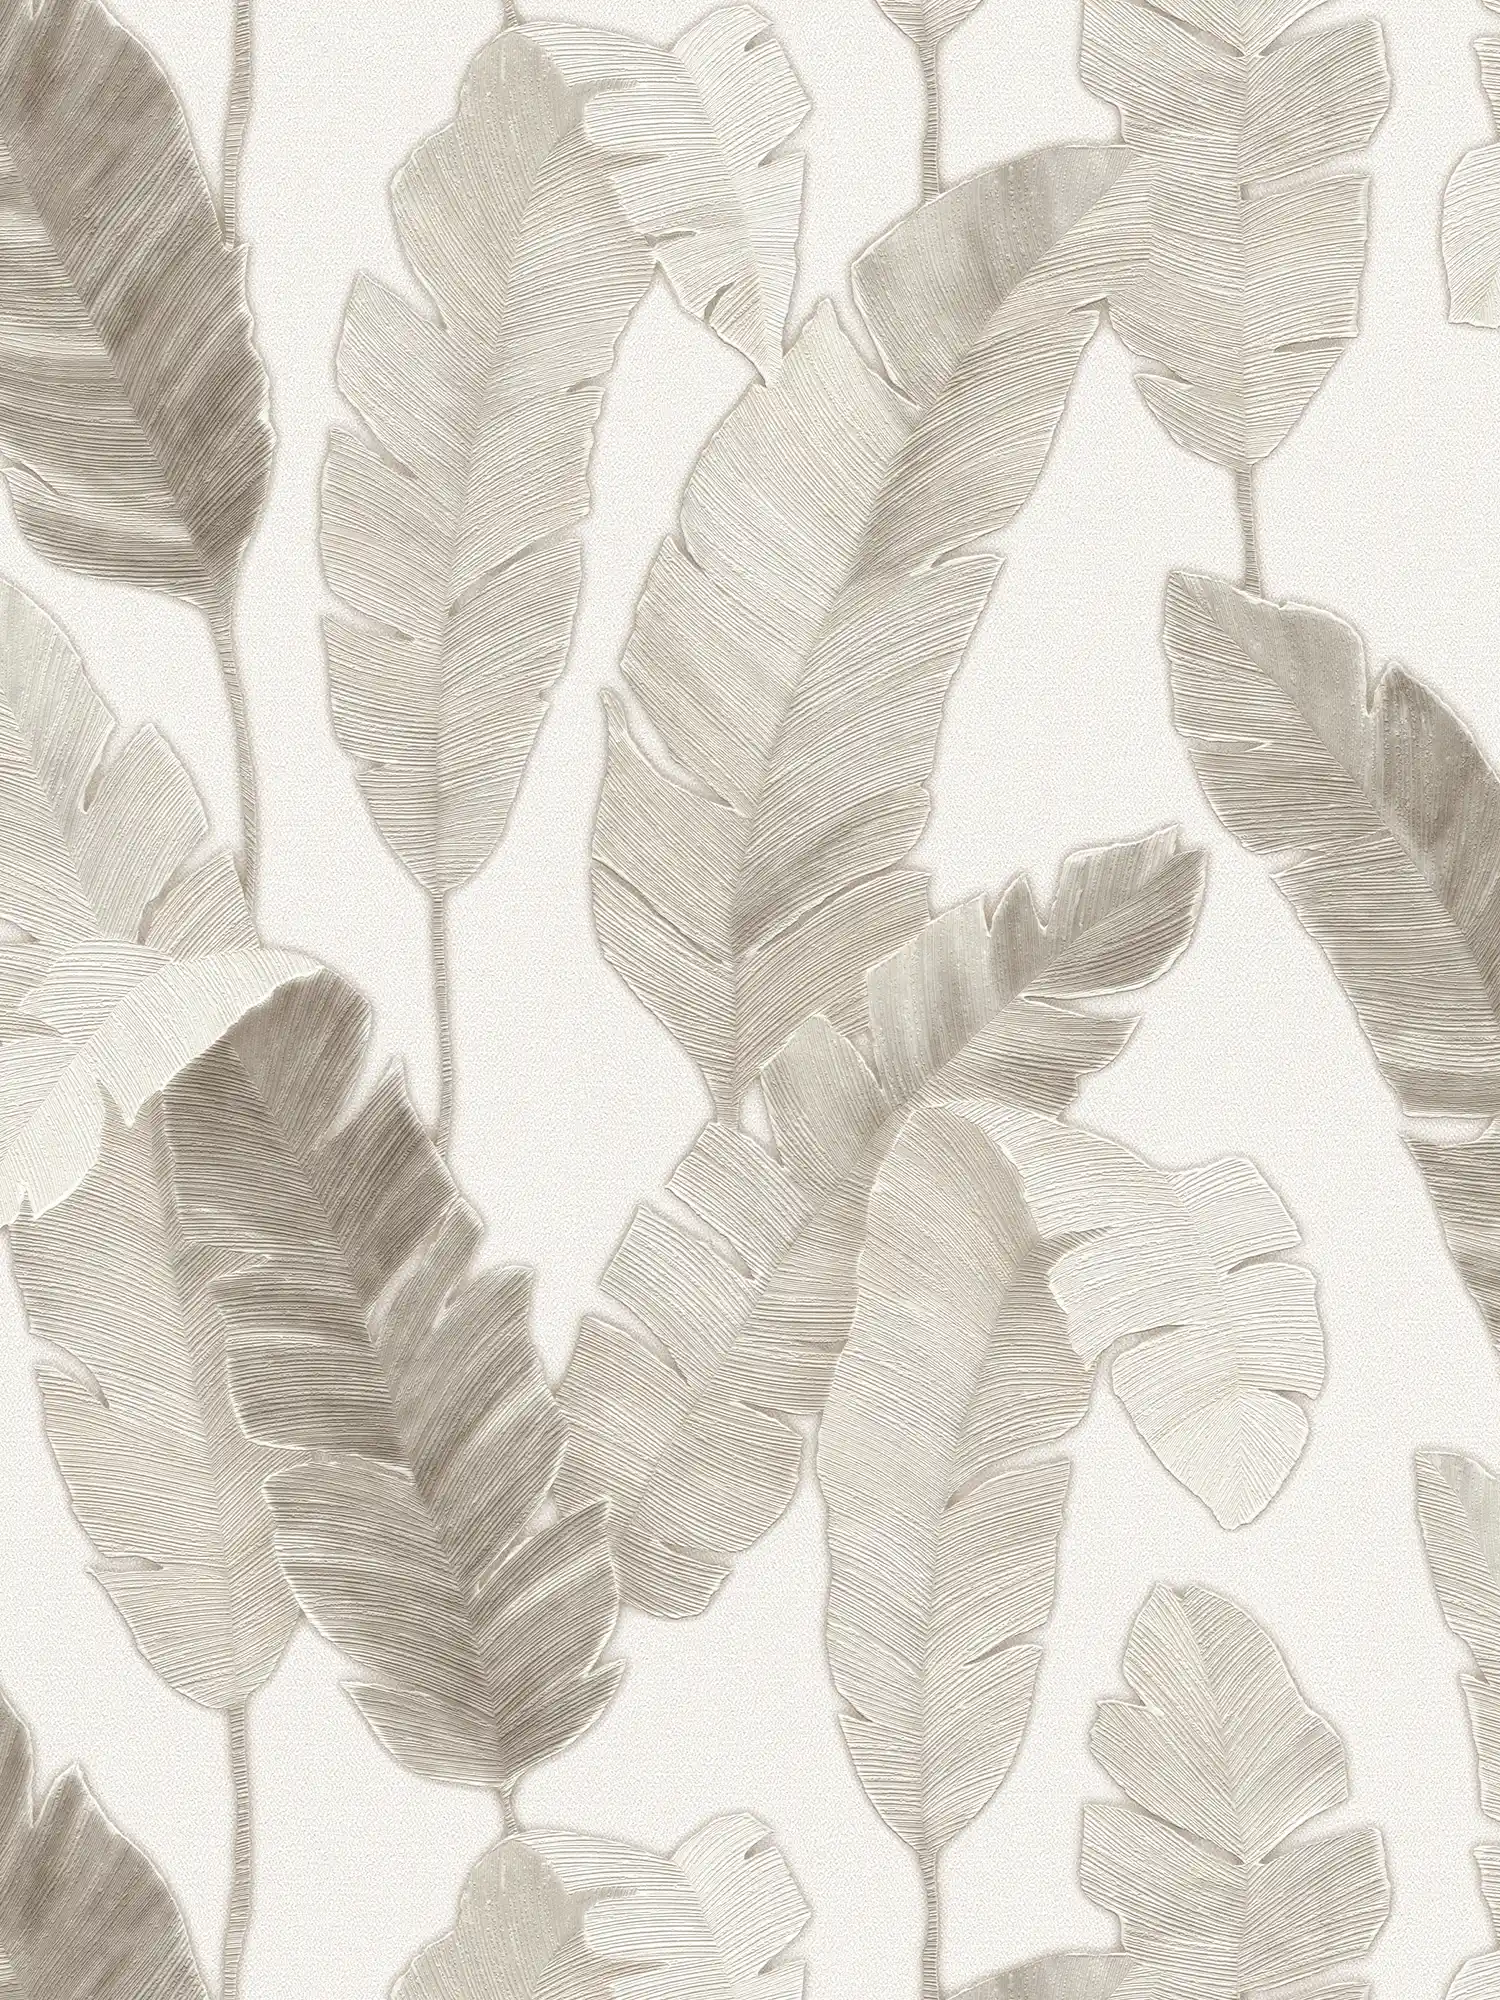 Non-woven wallpaper with subtle palm leaves - white, beige, grey
